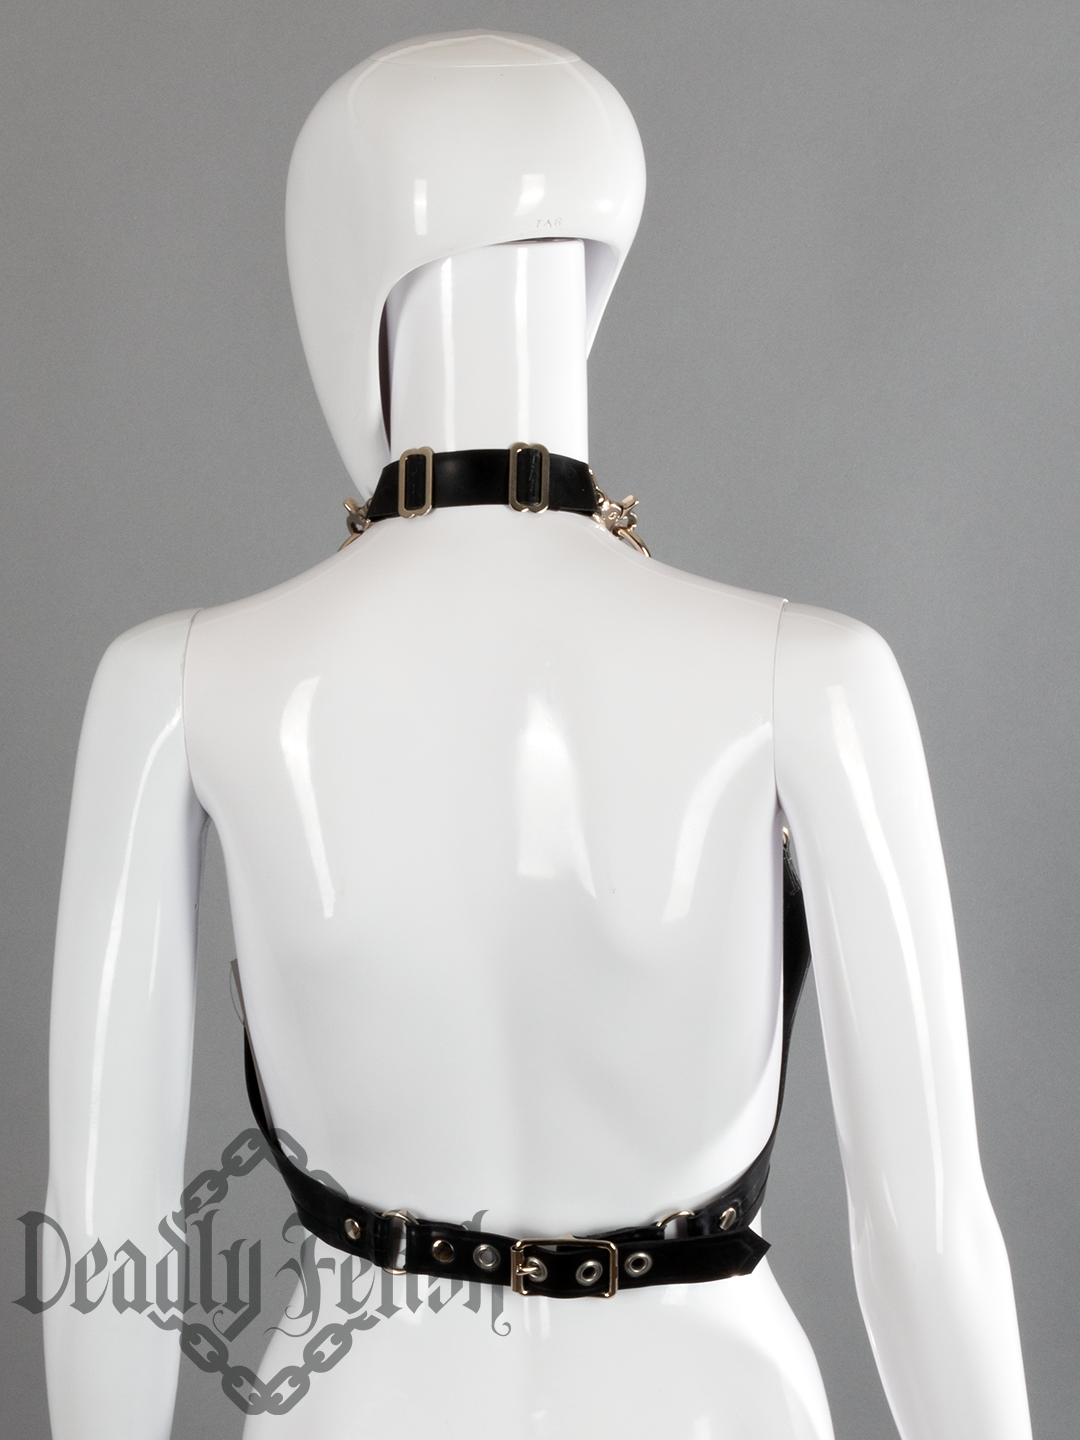 Deadly Fetish Latex: Harness #80